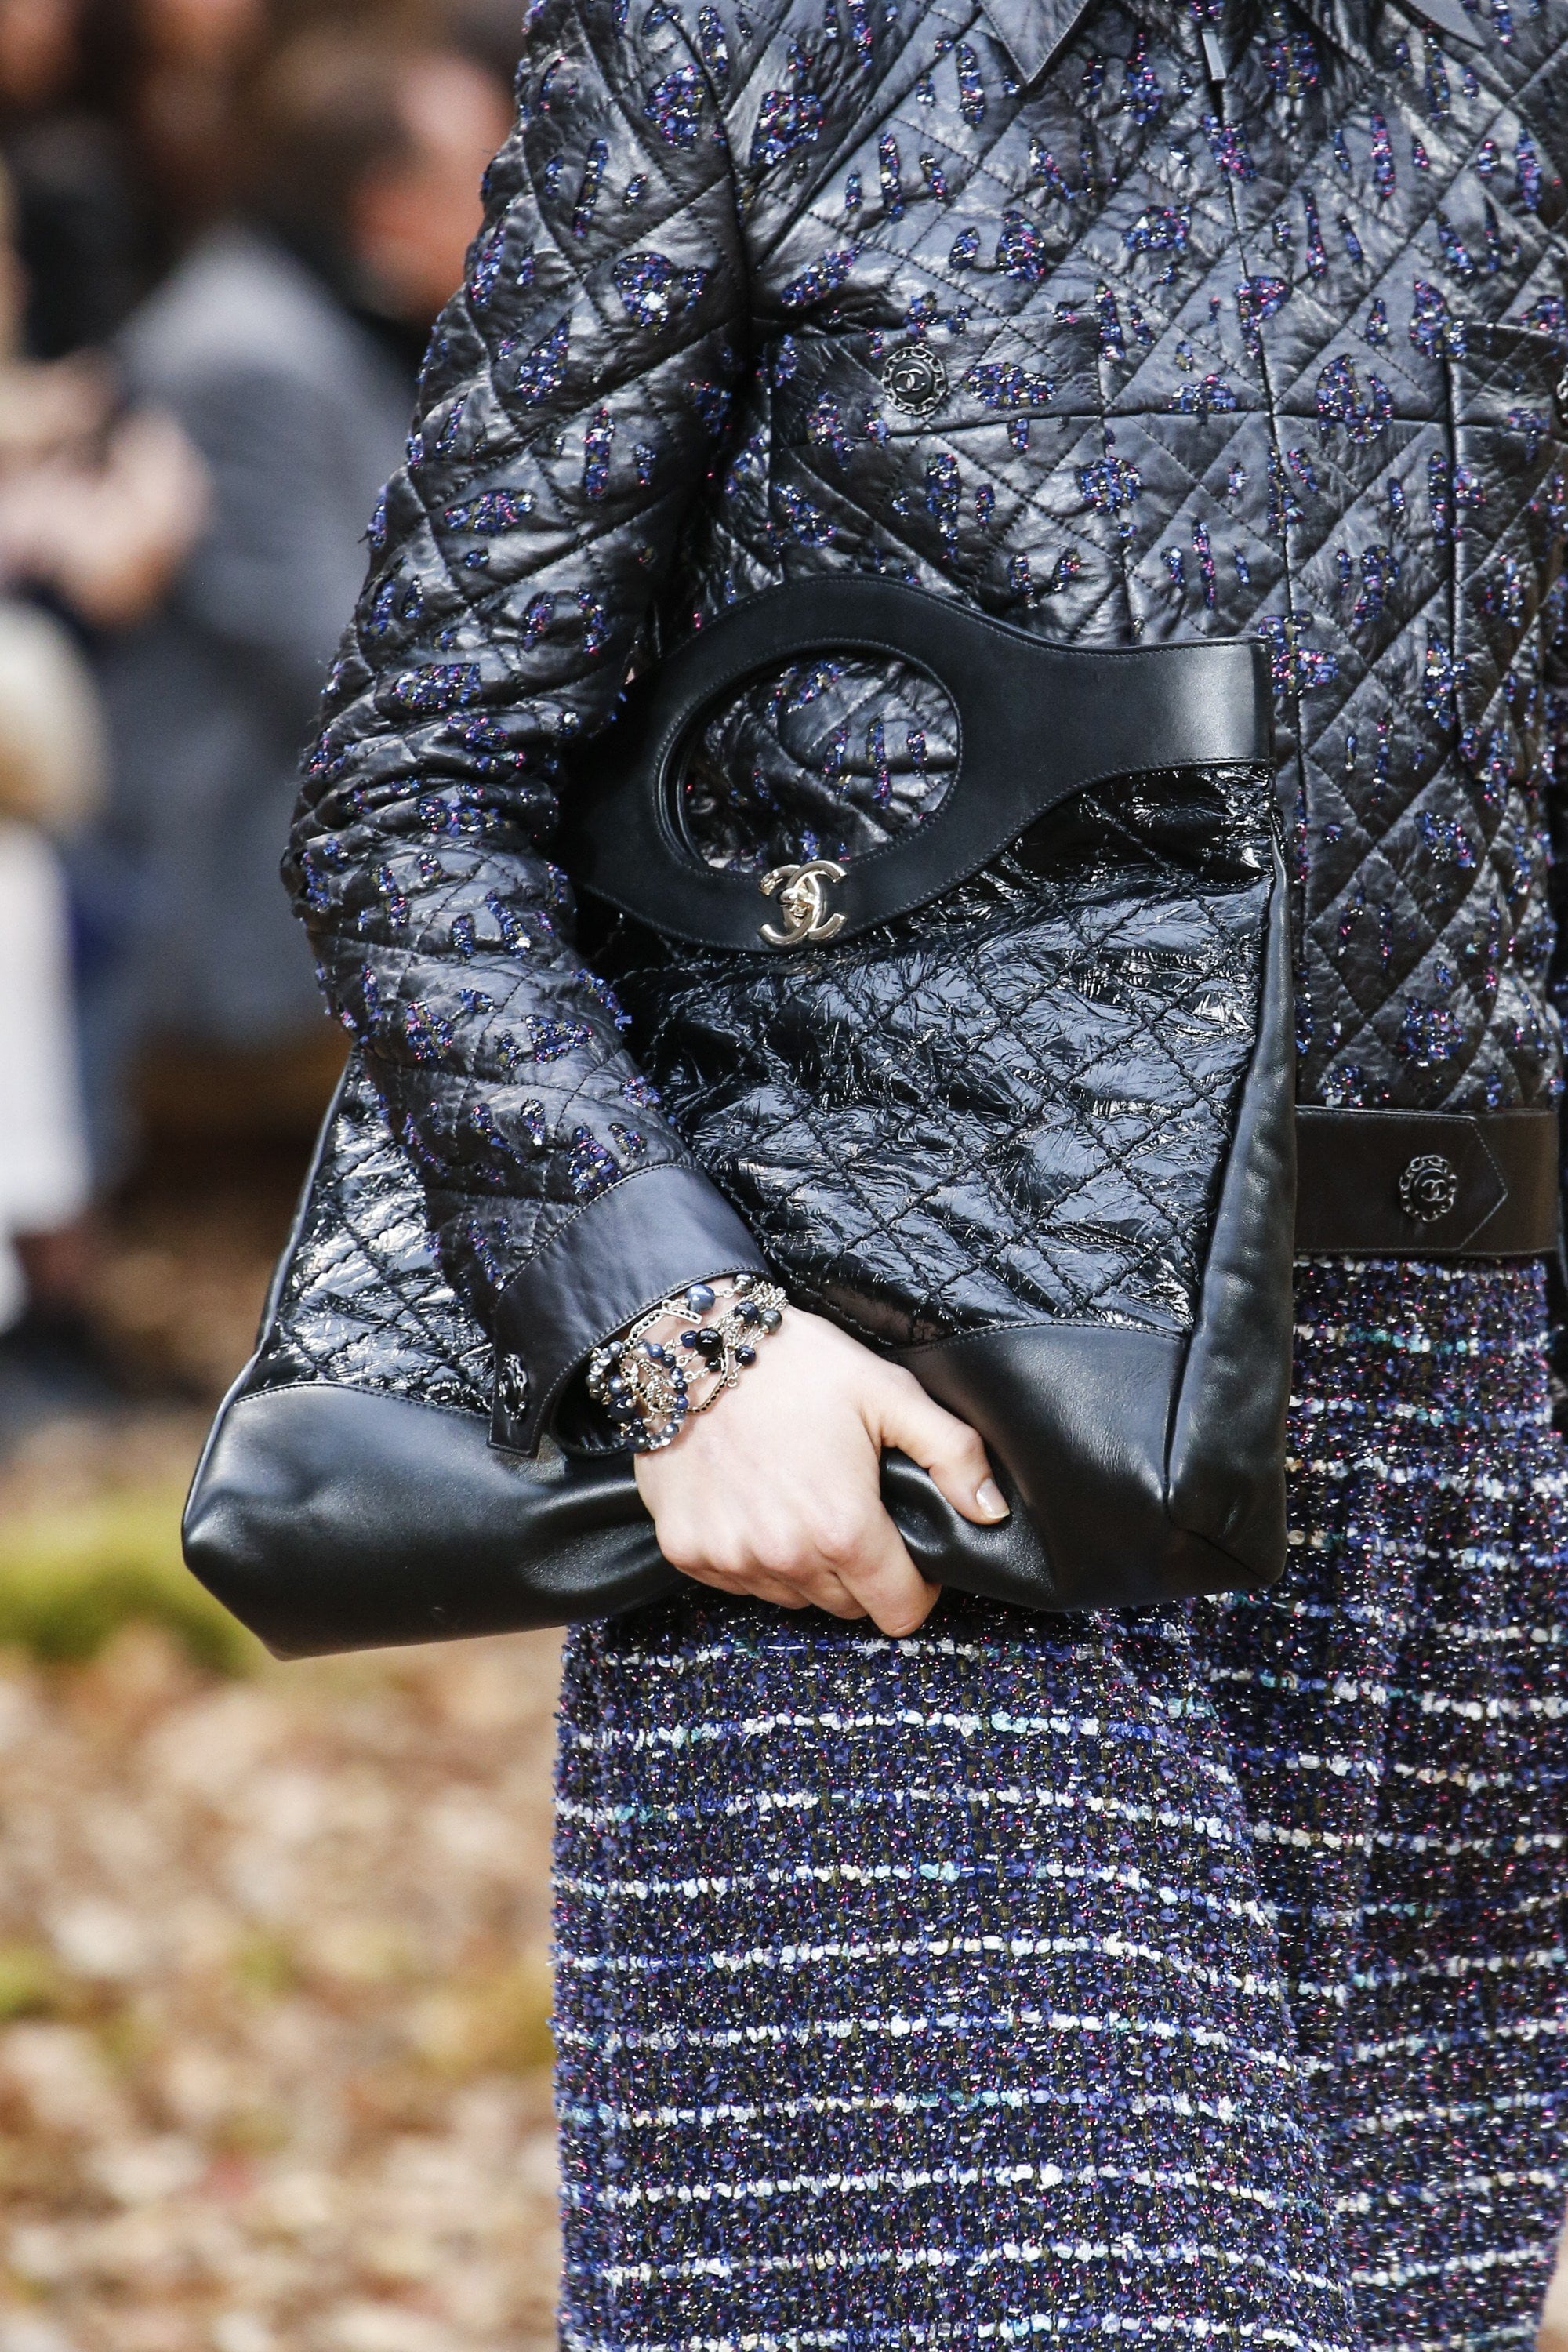 New at Chanel: The Chanel Gabrielle Bag - PurseBop